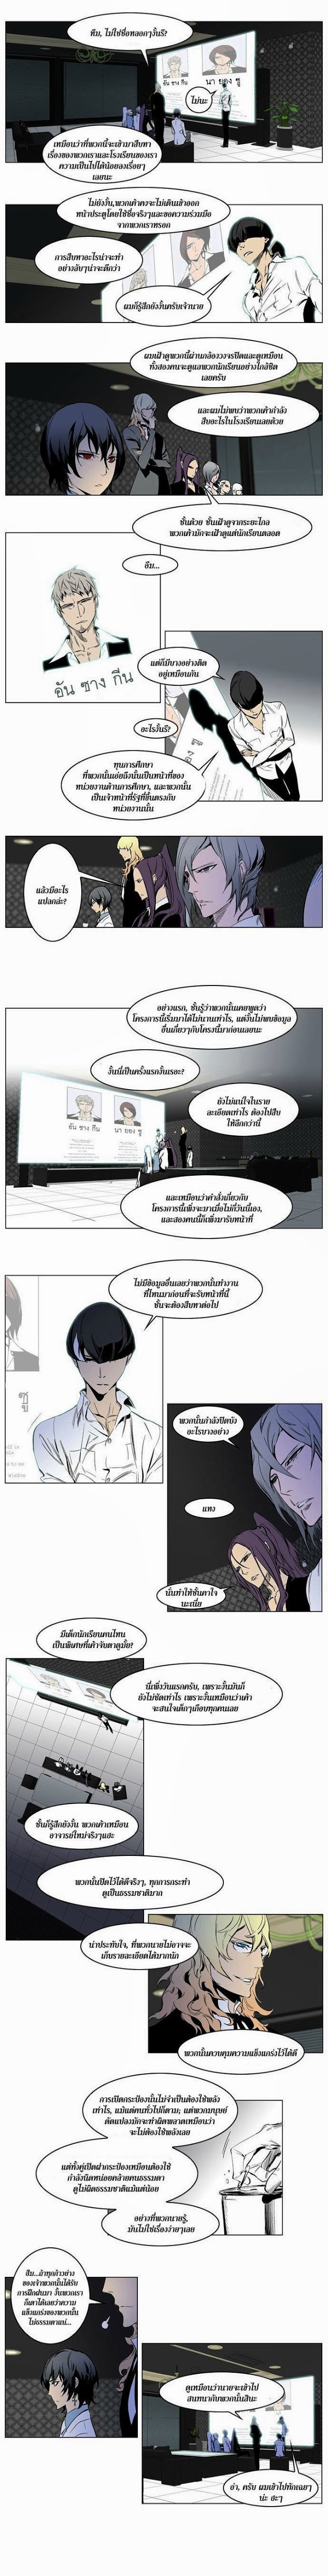 Noblesse 206 009